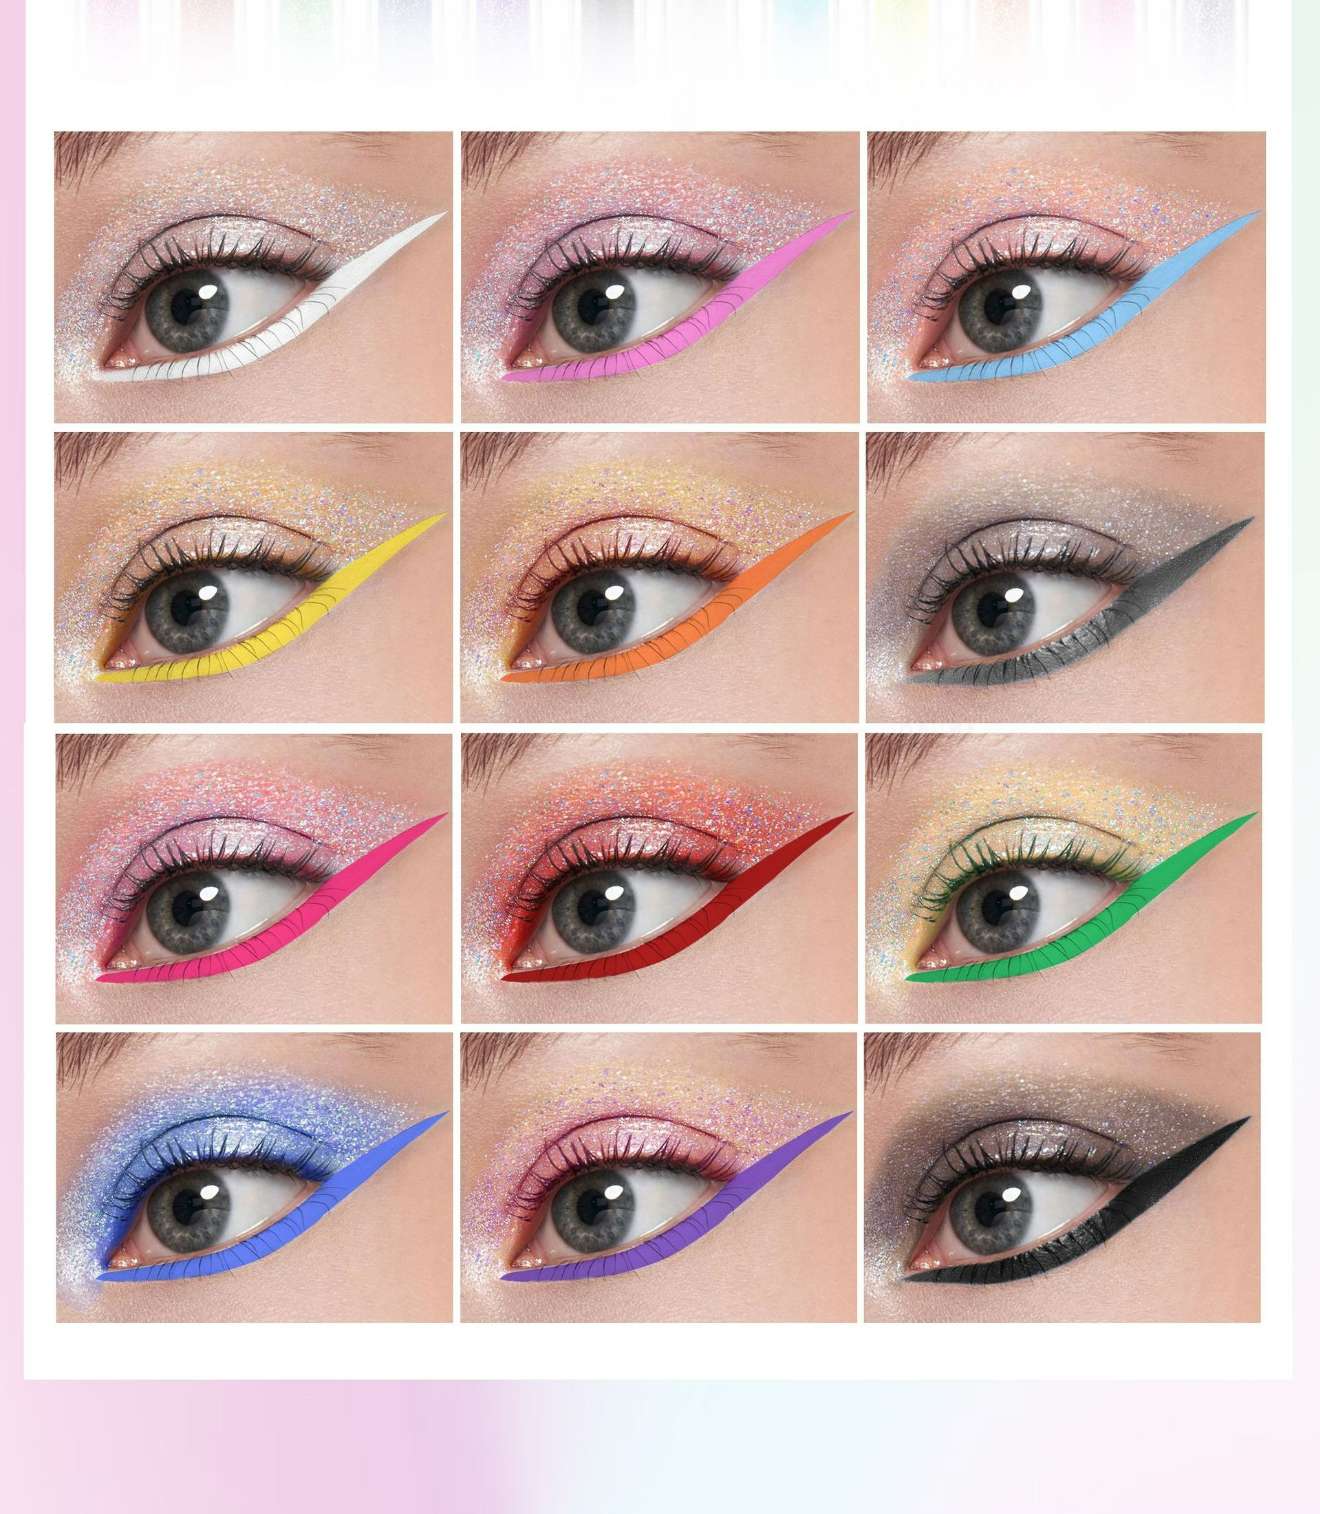 Eyebrow pencil CRRshop free shipping hot sale female new fashiong trend 12 color eyeliner pen durable waterproof eyeliner liquid pen extremely fine color silkworm laying pen dual-use double head pen purple orange blue green yellow red eyebrow pencils